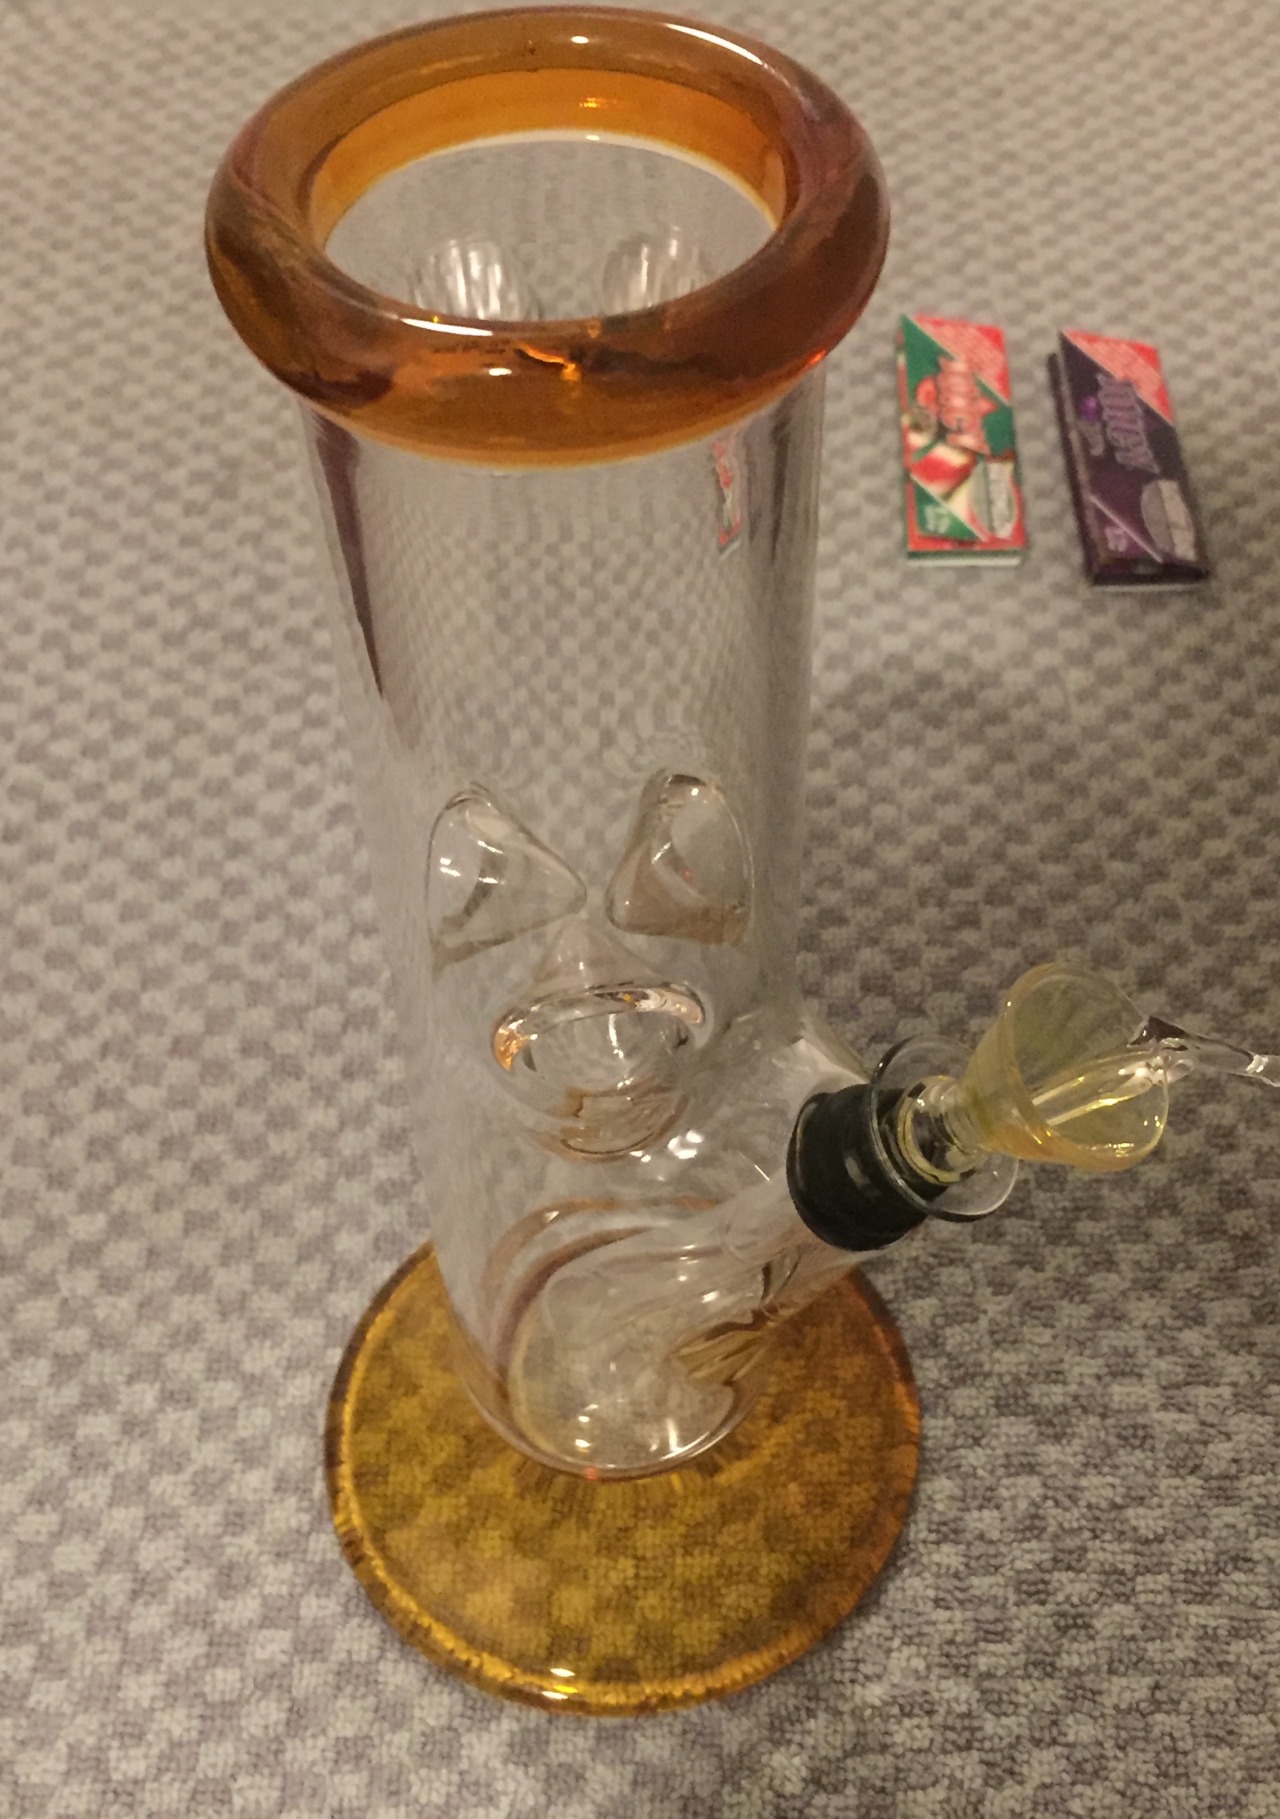 reeferkitten:  Giveaway includes:  Mini bong (8 inches) Juicy Jays  Grinder  Purple